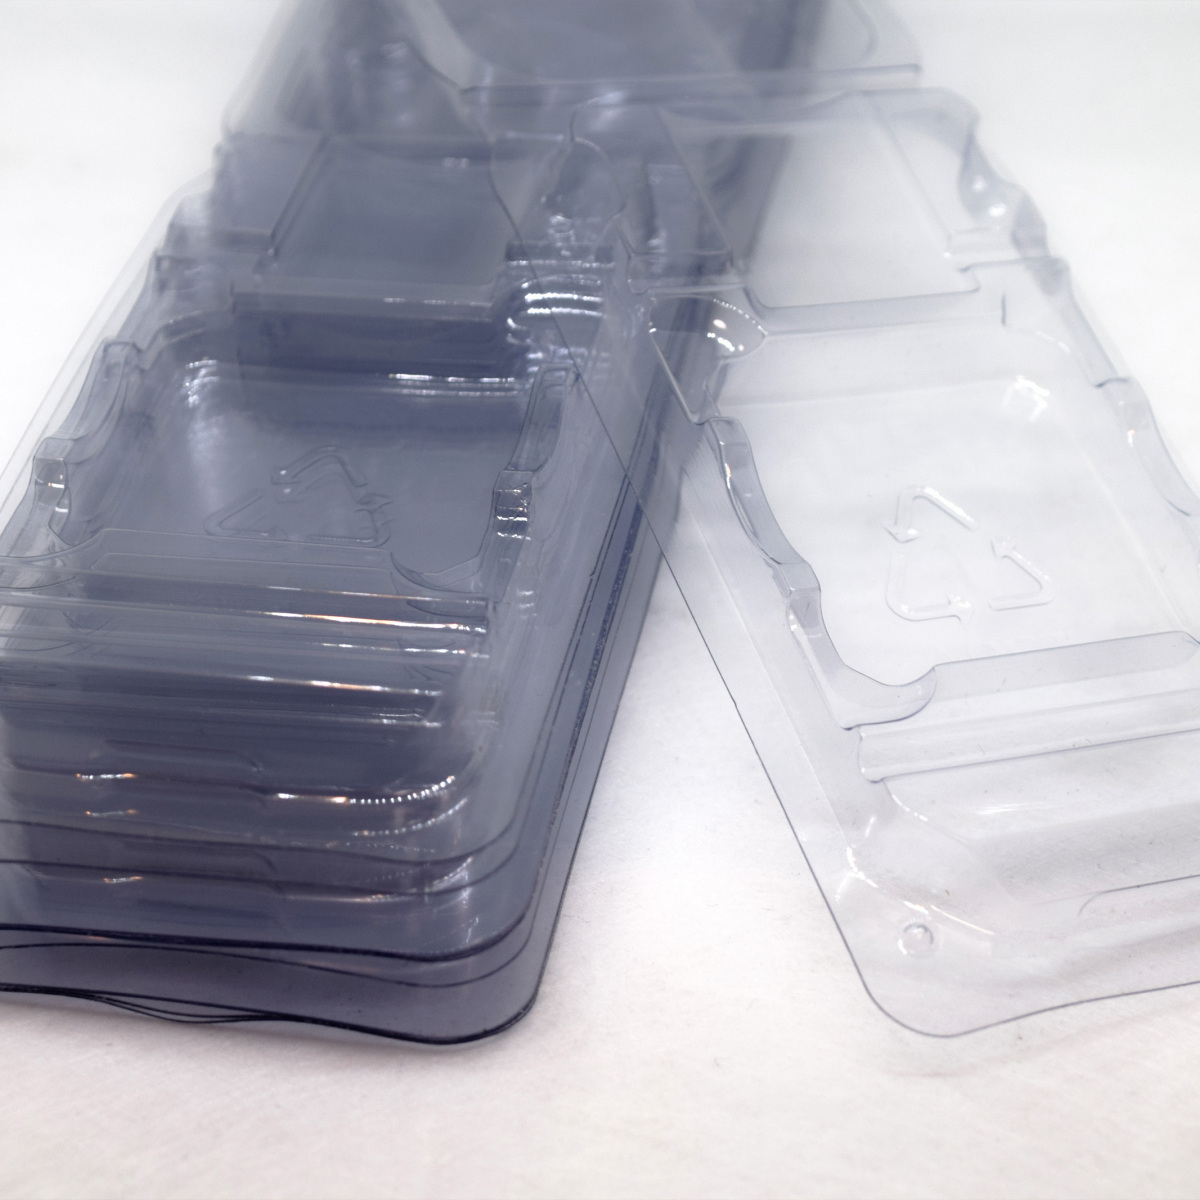 [ fm1 correspondence ]CPU shell case AMD for plastic [AM4. RYZEN also correspondence ] storage storage case 10 pieces set 